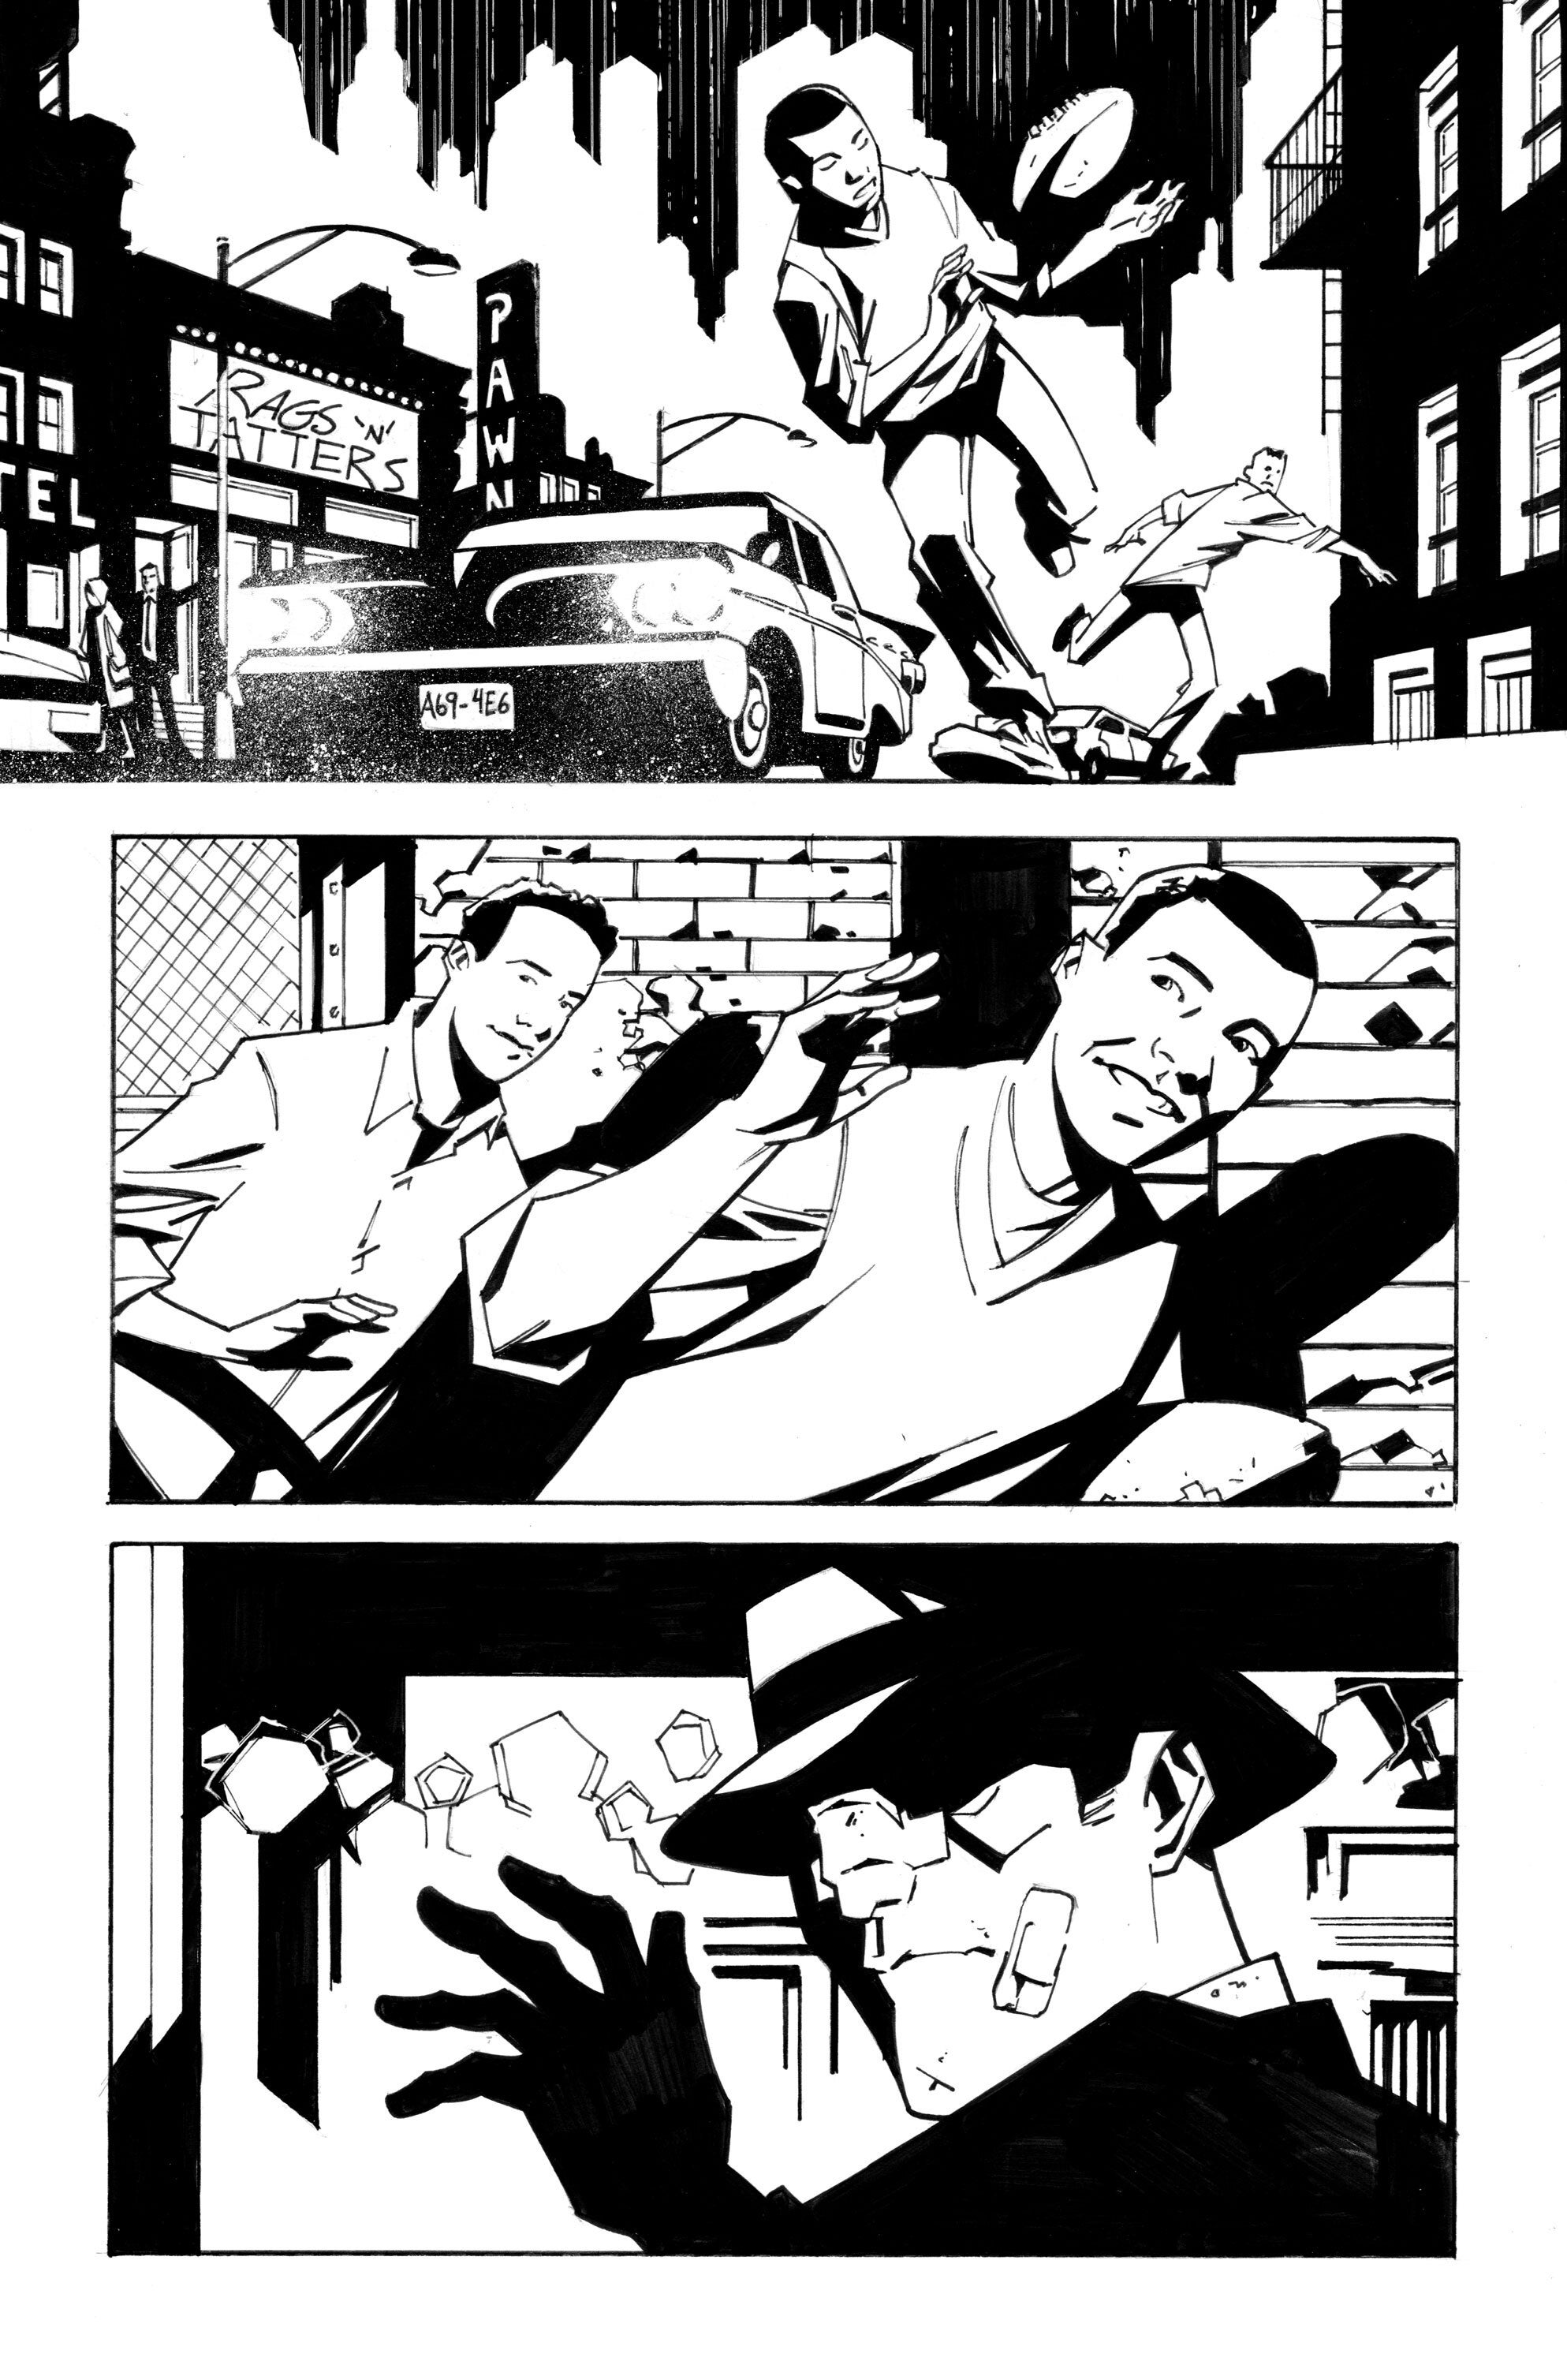 Gotham City: Year One #1 unlettered, uncolored page by Phil Hester & Eric Gapstur